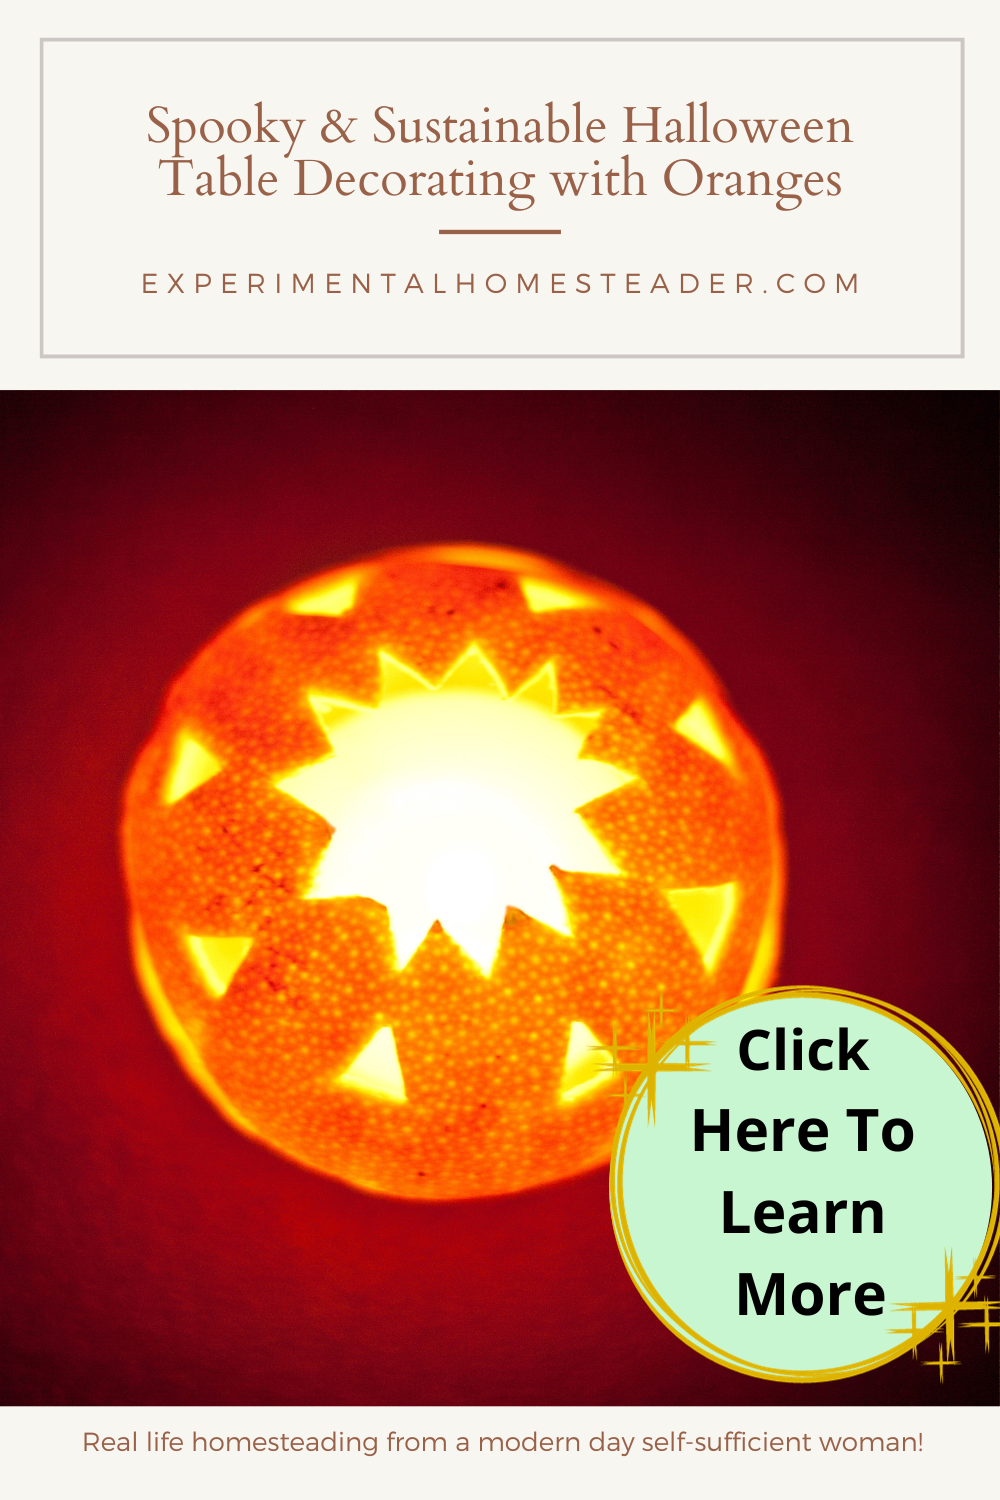 An orange with a candle in it to create an orange luminary table decoration.